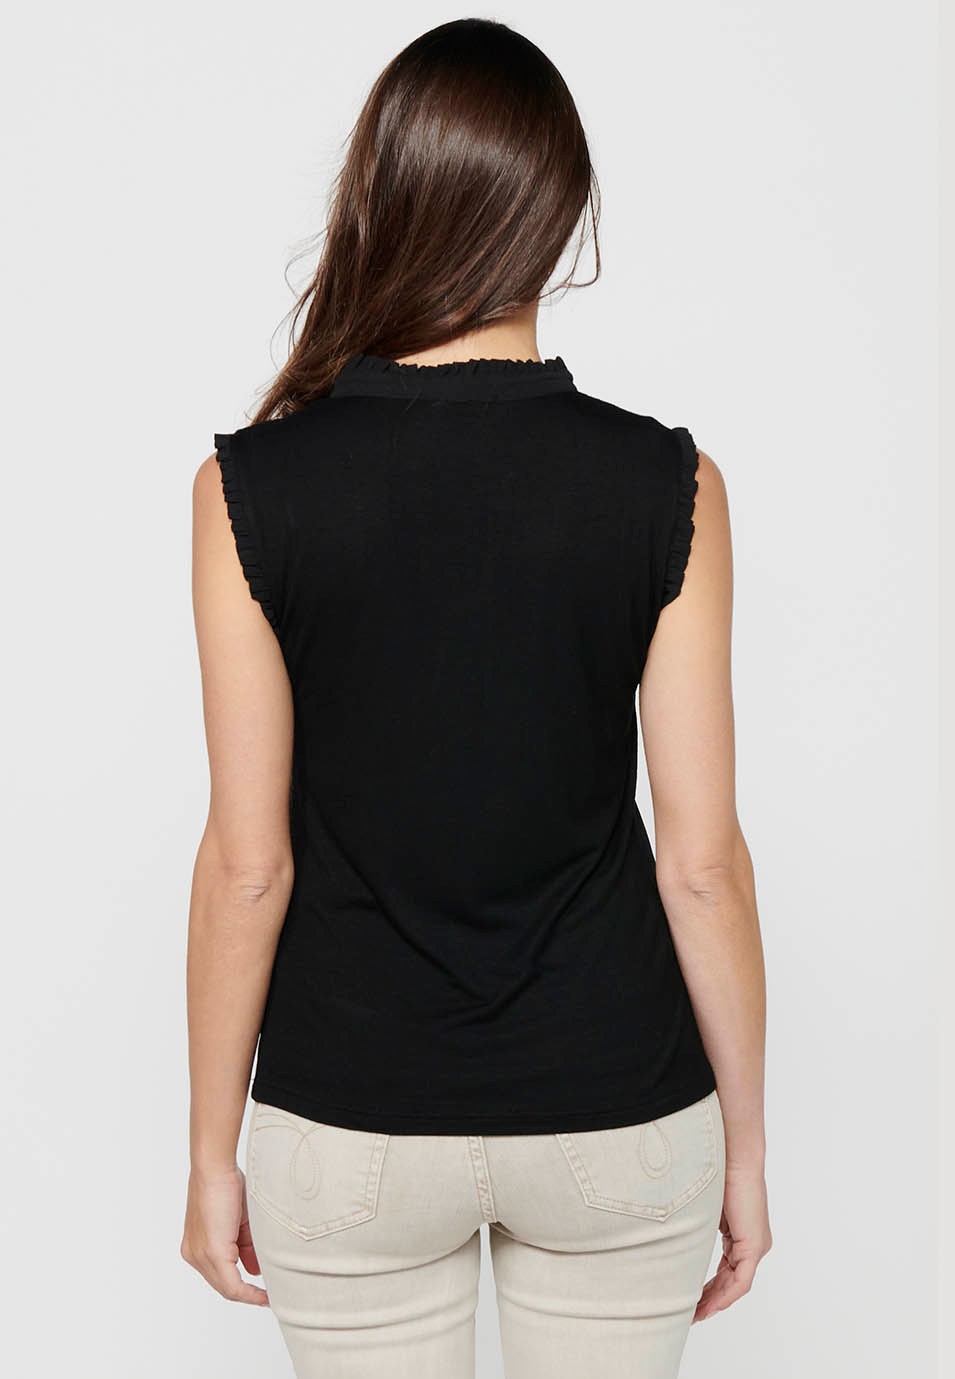 Black Flowy Sleeveless T-shirt with Round Neck for Women 4